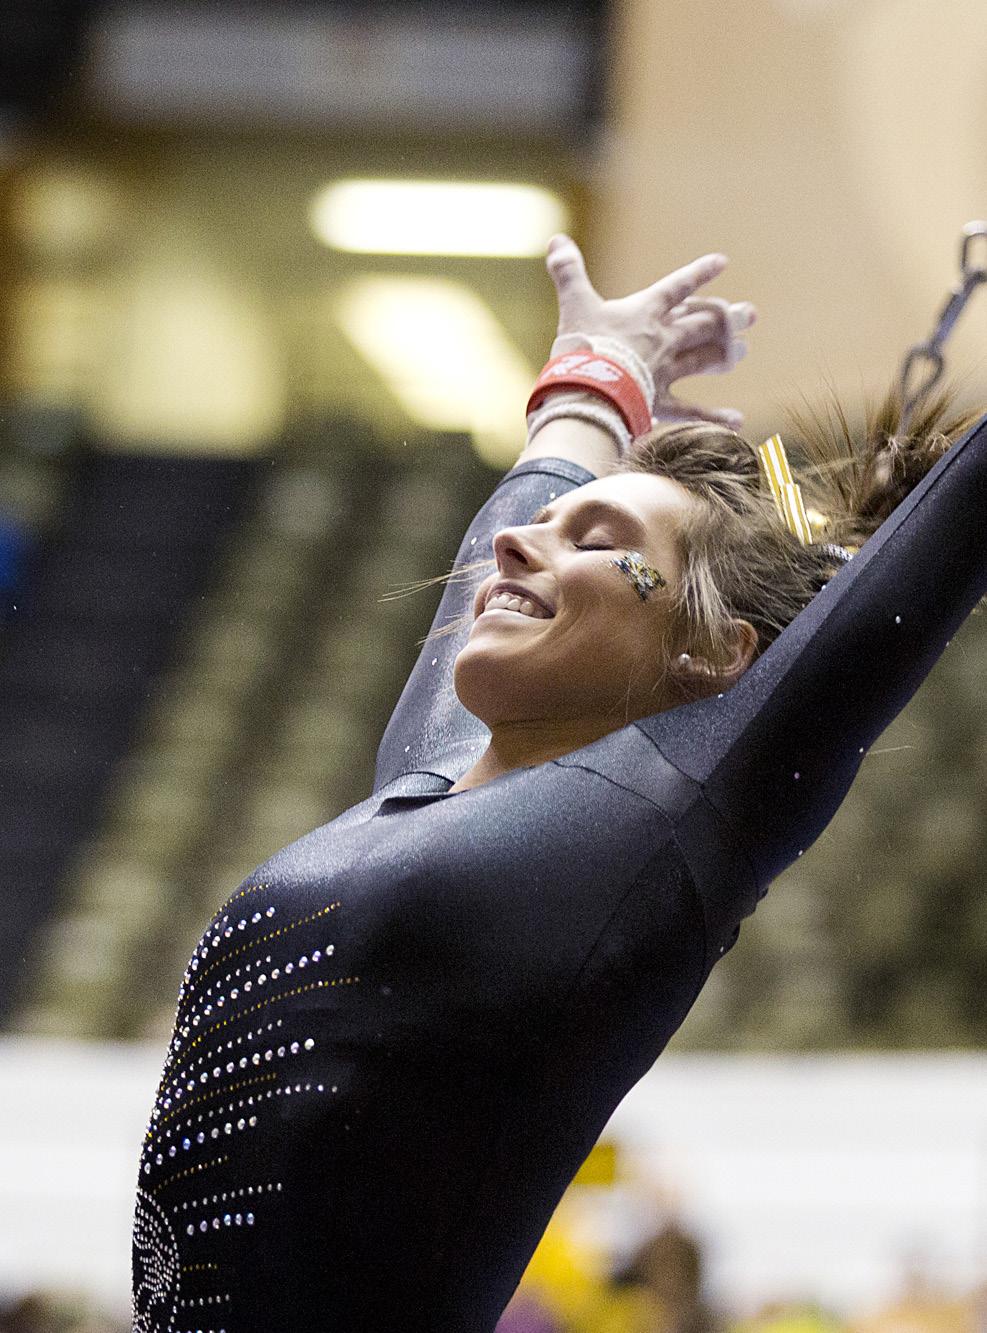 Had a standout day at the 2013 SEC Champ. posting four new career highs. Vault: 9.800 (at NC State, 2014) Bars: 9.775 (twice, last at NC State, 2014) Beam: 9.